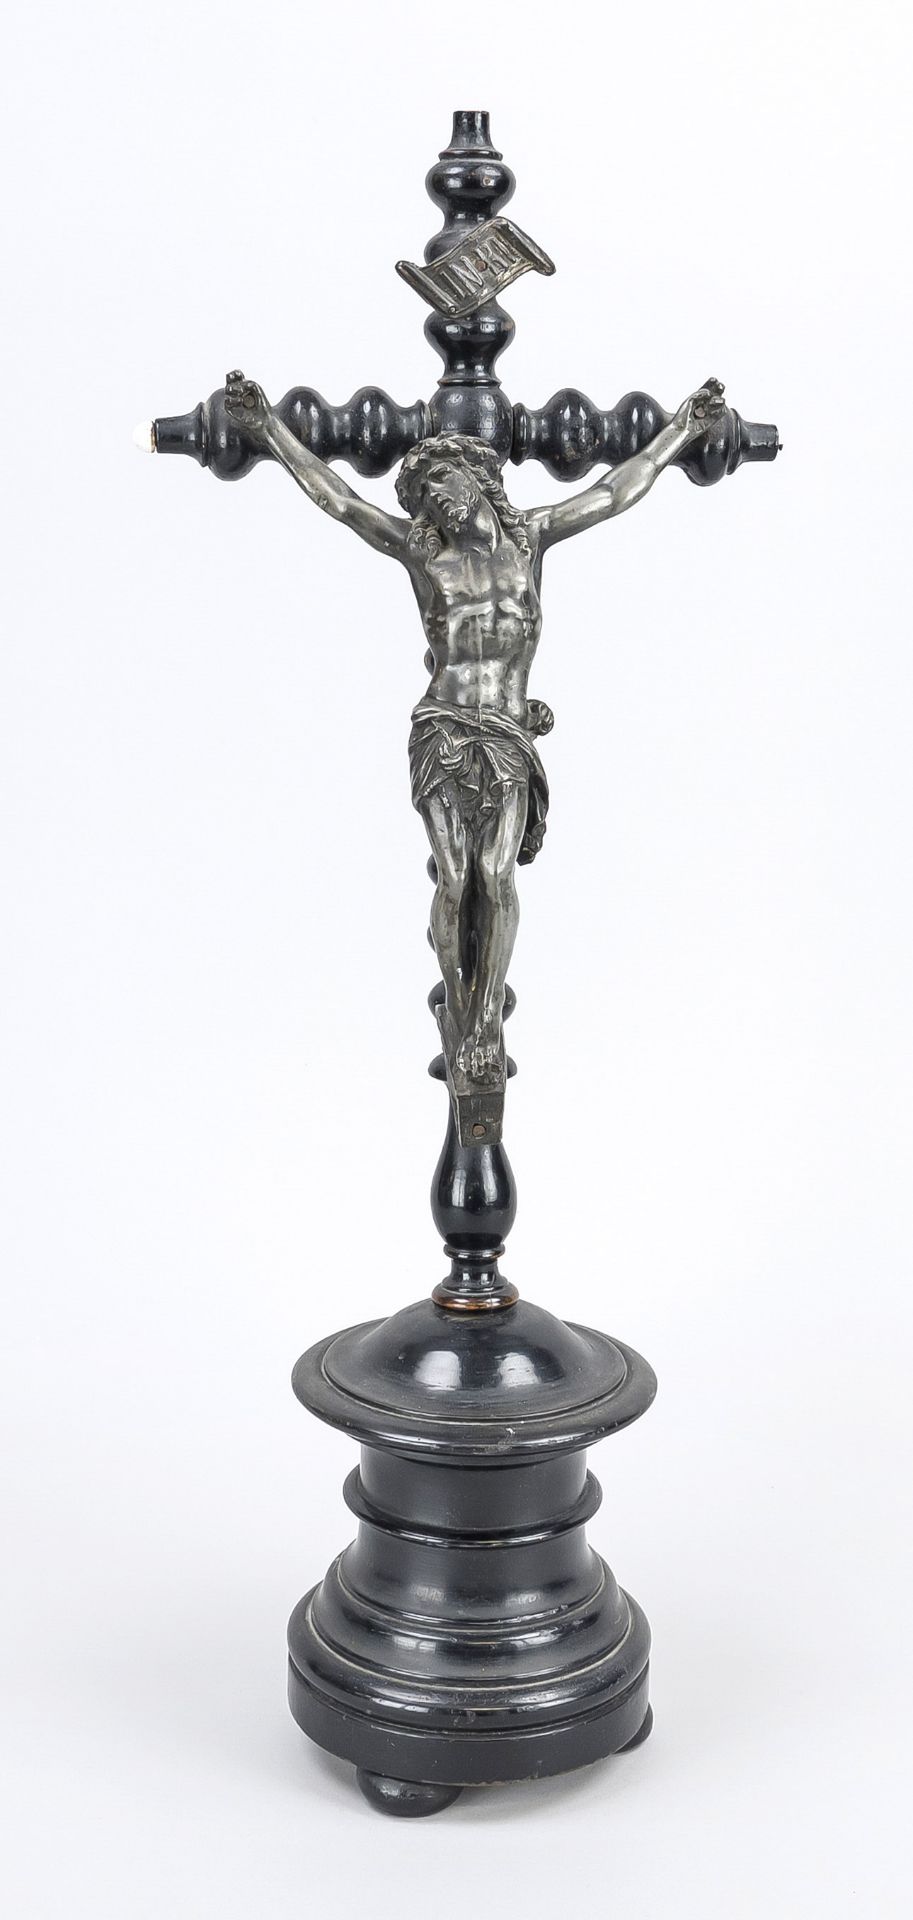 Crucifix, 19th century, wood, turned and ebonized, three-nail type probably made of silver, h. 53